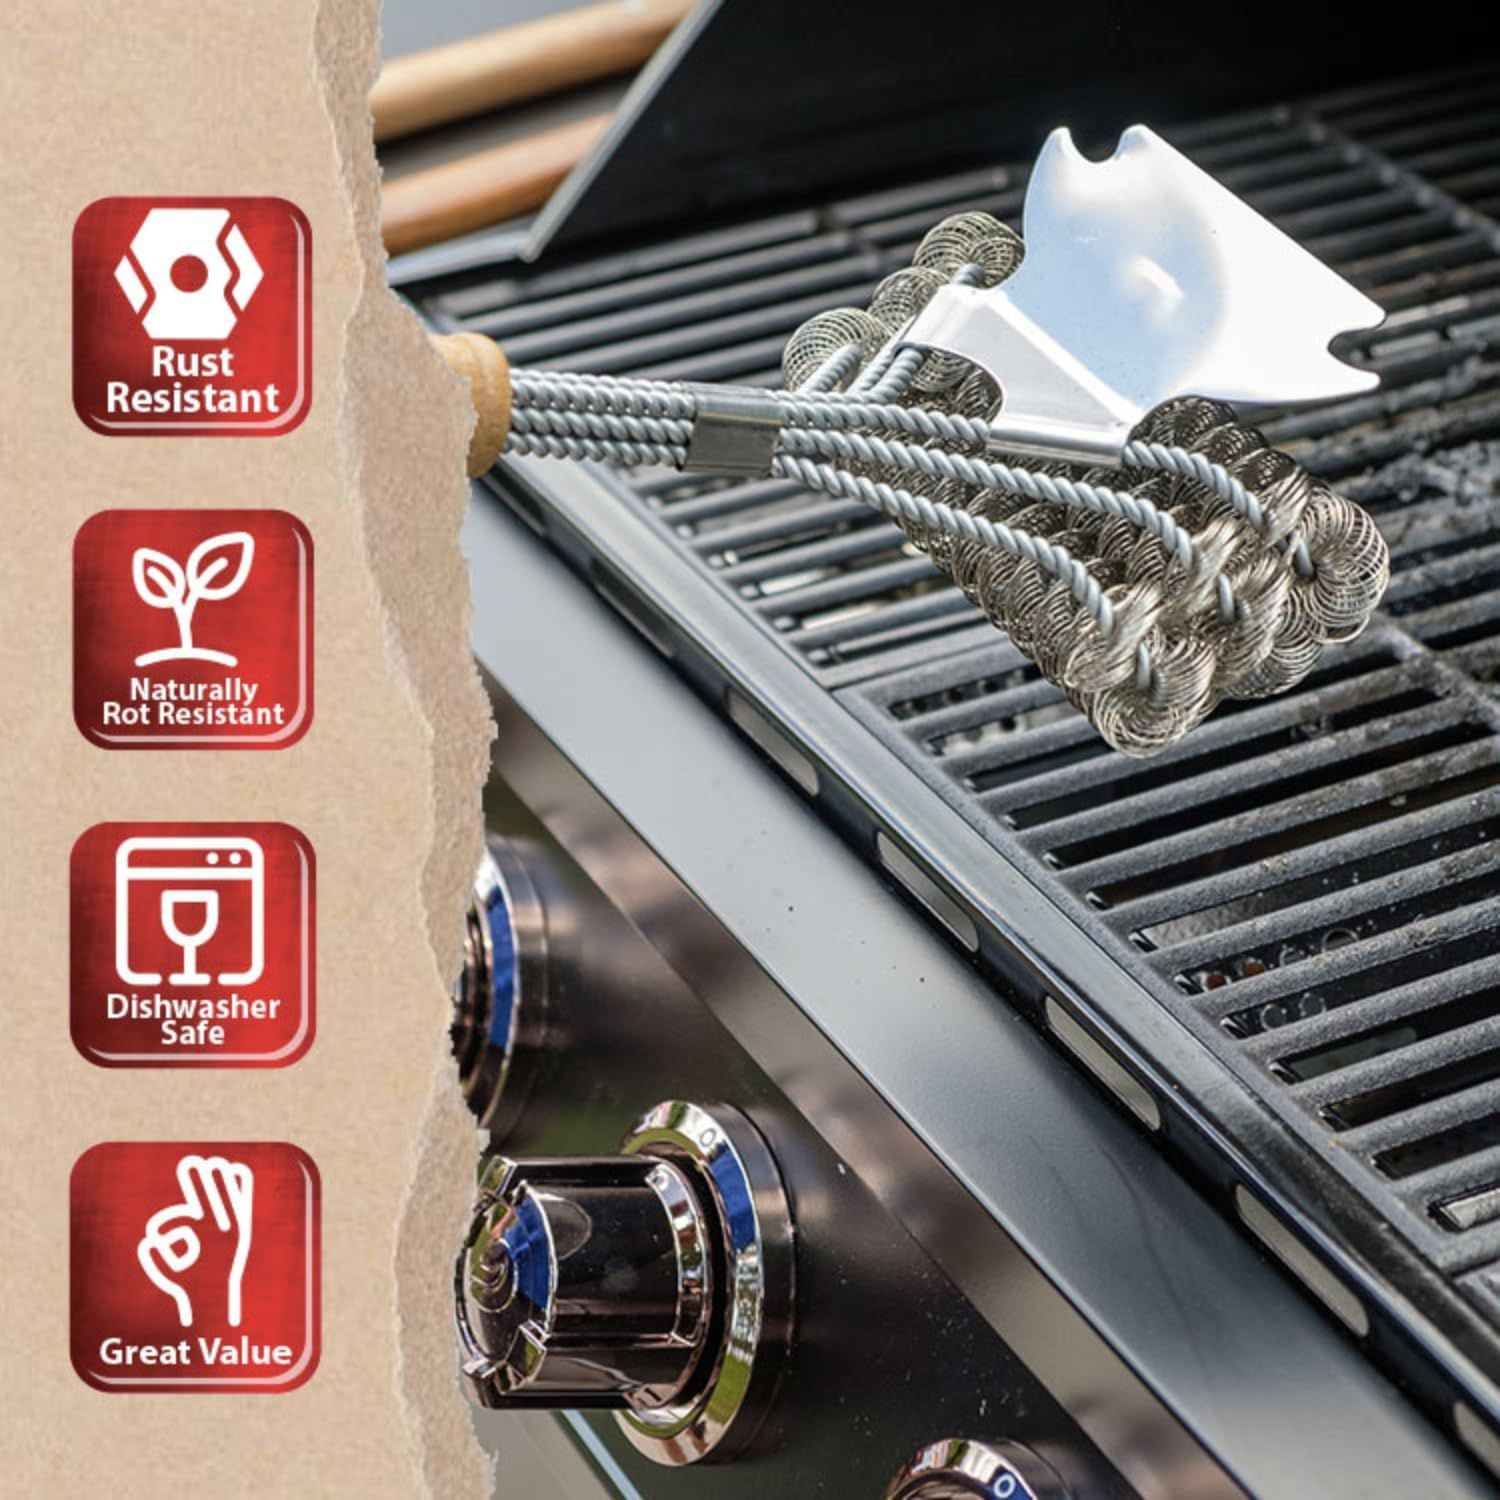 Scrubit Grill Cleaning Brush - Bristle Free BBQ Cleaner with Heavy Duty Scrubber Pad, Safe Cast Iron and Griddle Scraper Pads, Ideal Accessories for